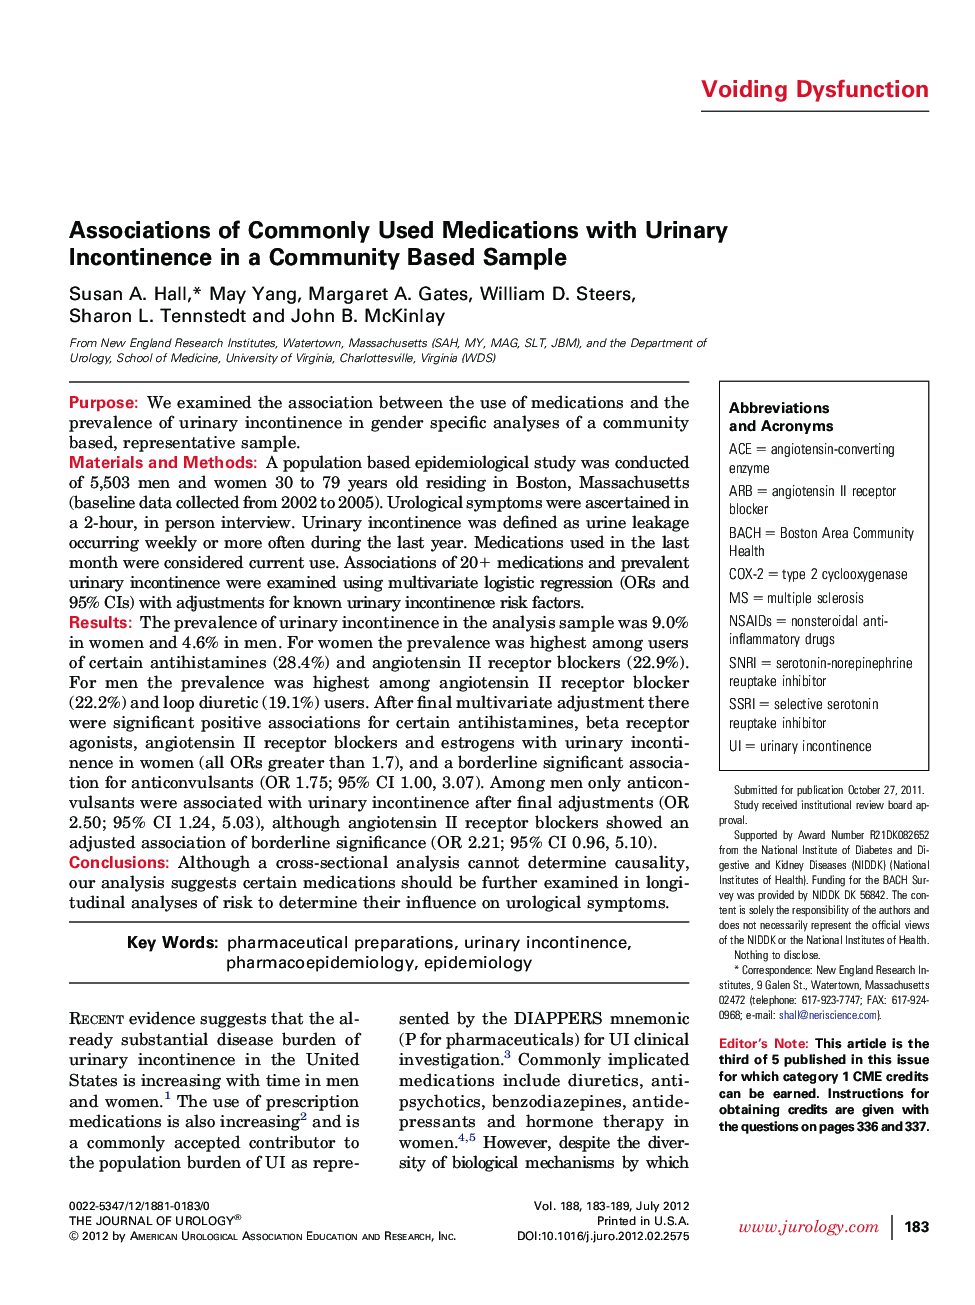 Associations of Commonly Used Medications with Urinary Incontinence in a Community Based Sample 